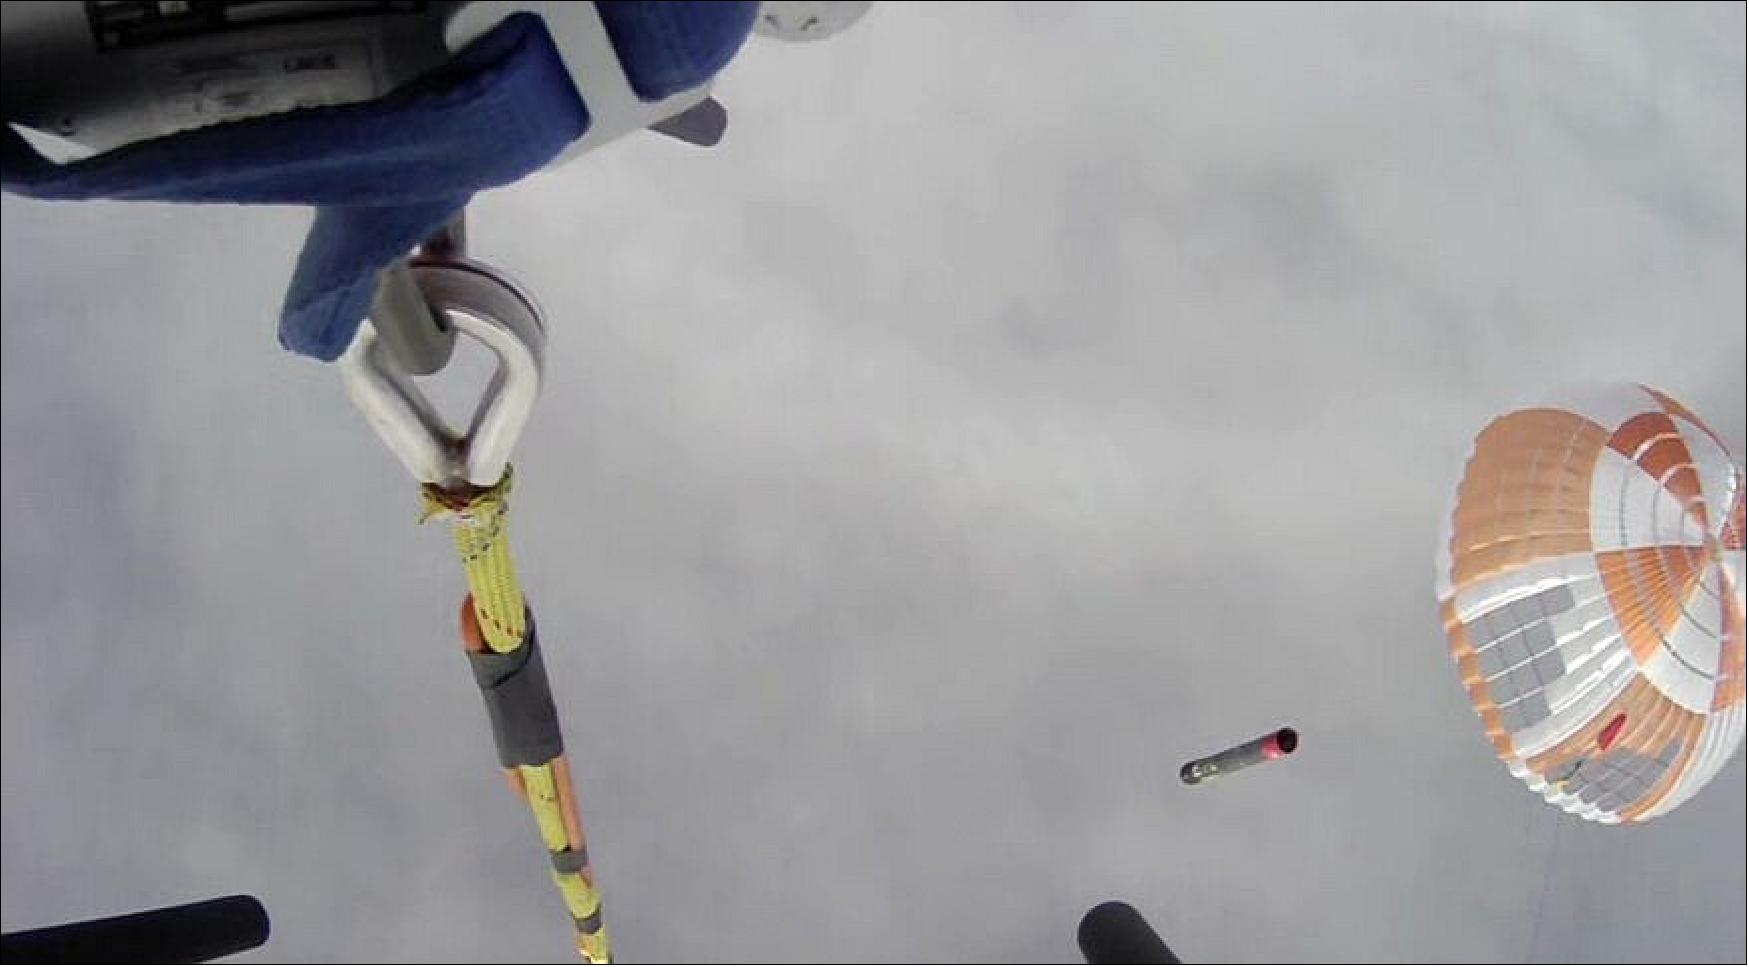 Figure 27: The Electron booster, descending under a parachute (right), as seen from the helicopter as it attempted to grapple the parachute. The helicopter released the booster moments later, though (image credit: Rocket Lab)